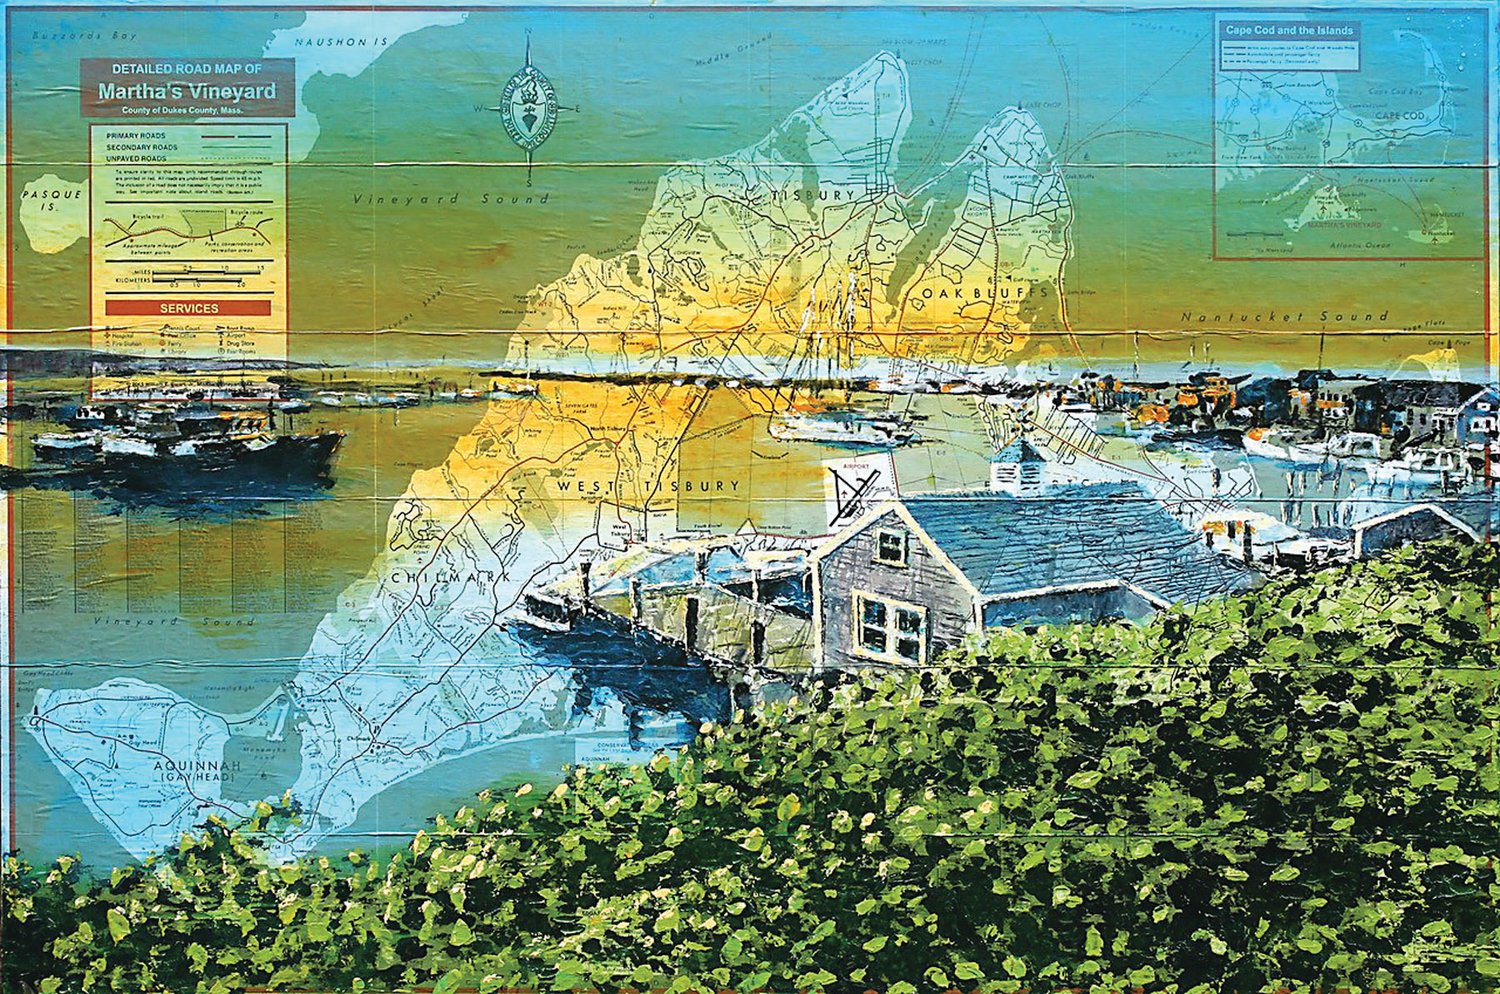 A painting of Martha’s Vineyard is by John Petach, of Stockton, N.J., one of the Covered Bridge Artisans.